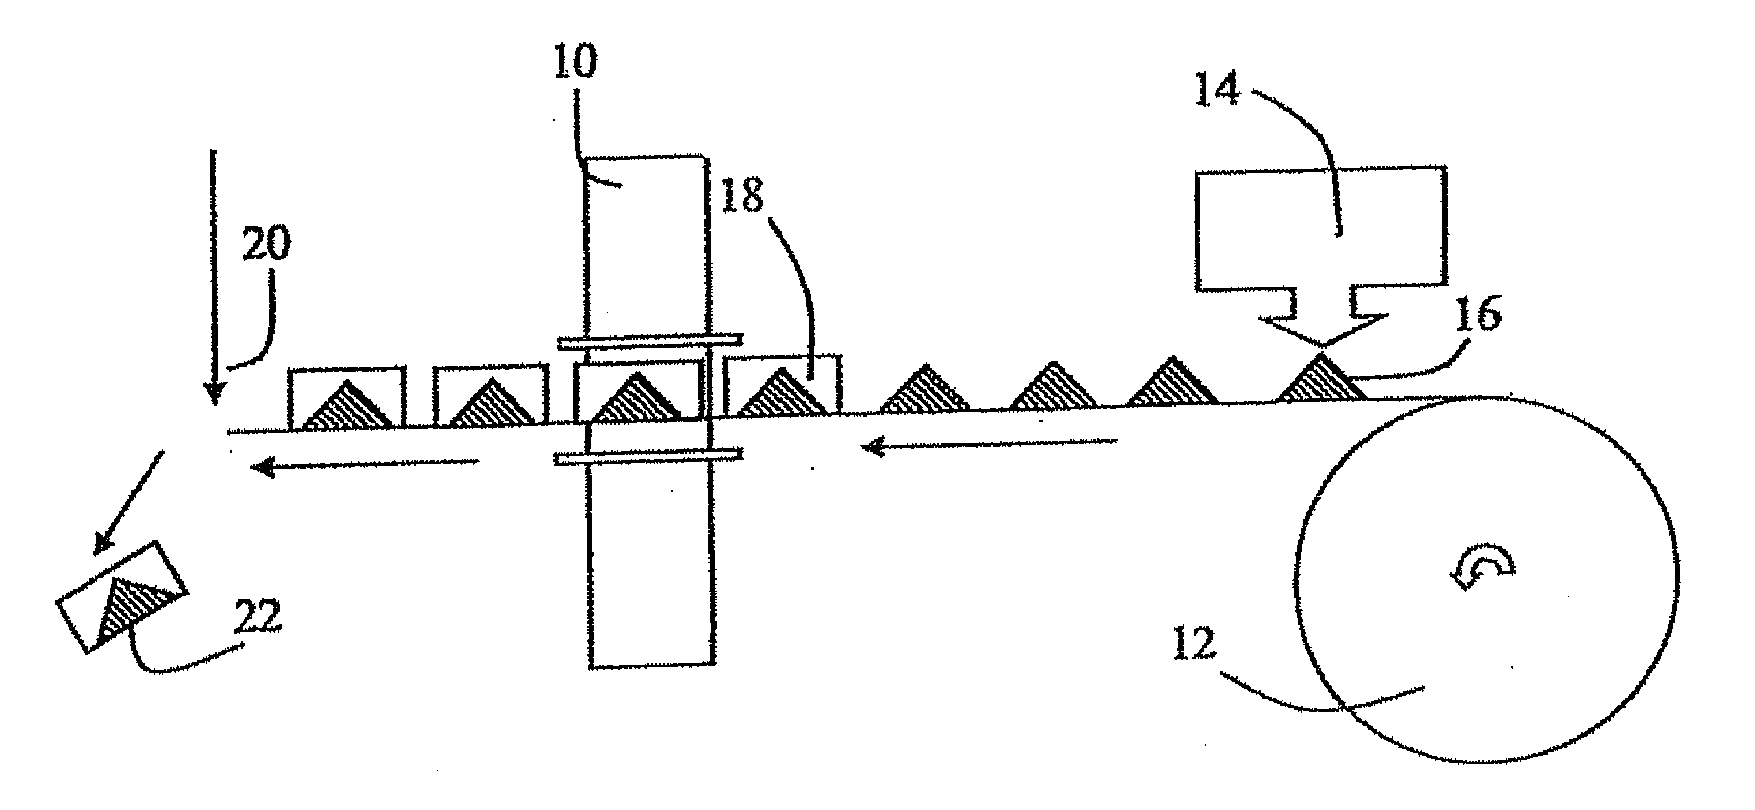 Apparatus and method for the measurement of mass and density and/or for the measurement of the humidity of portioned units